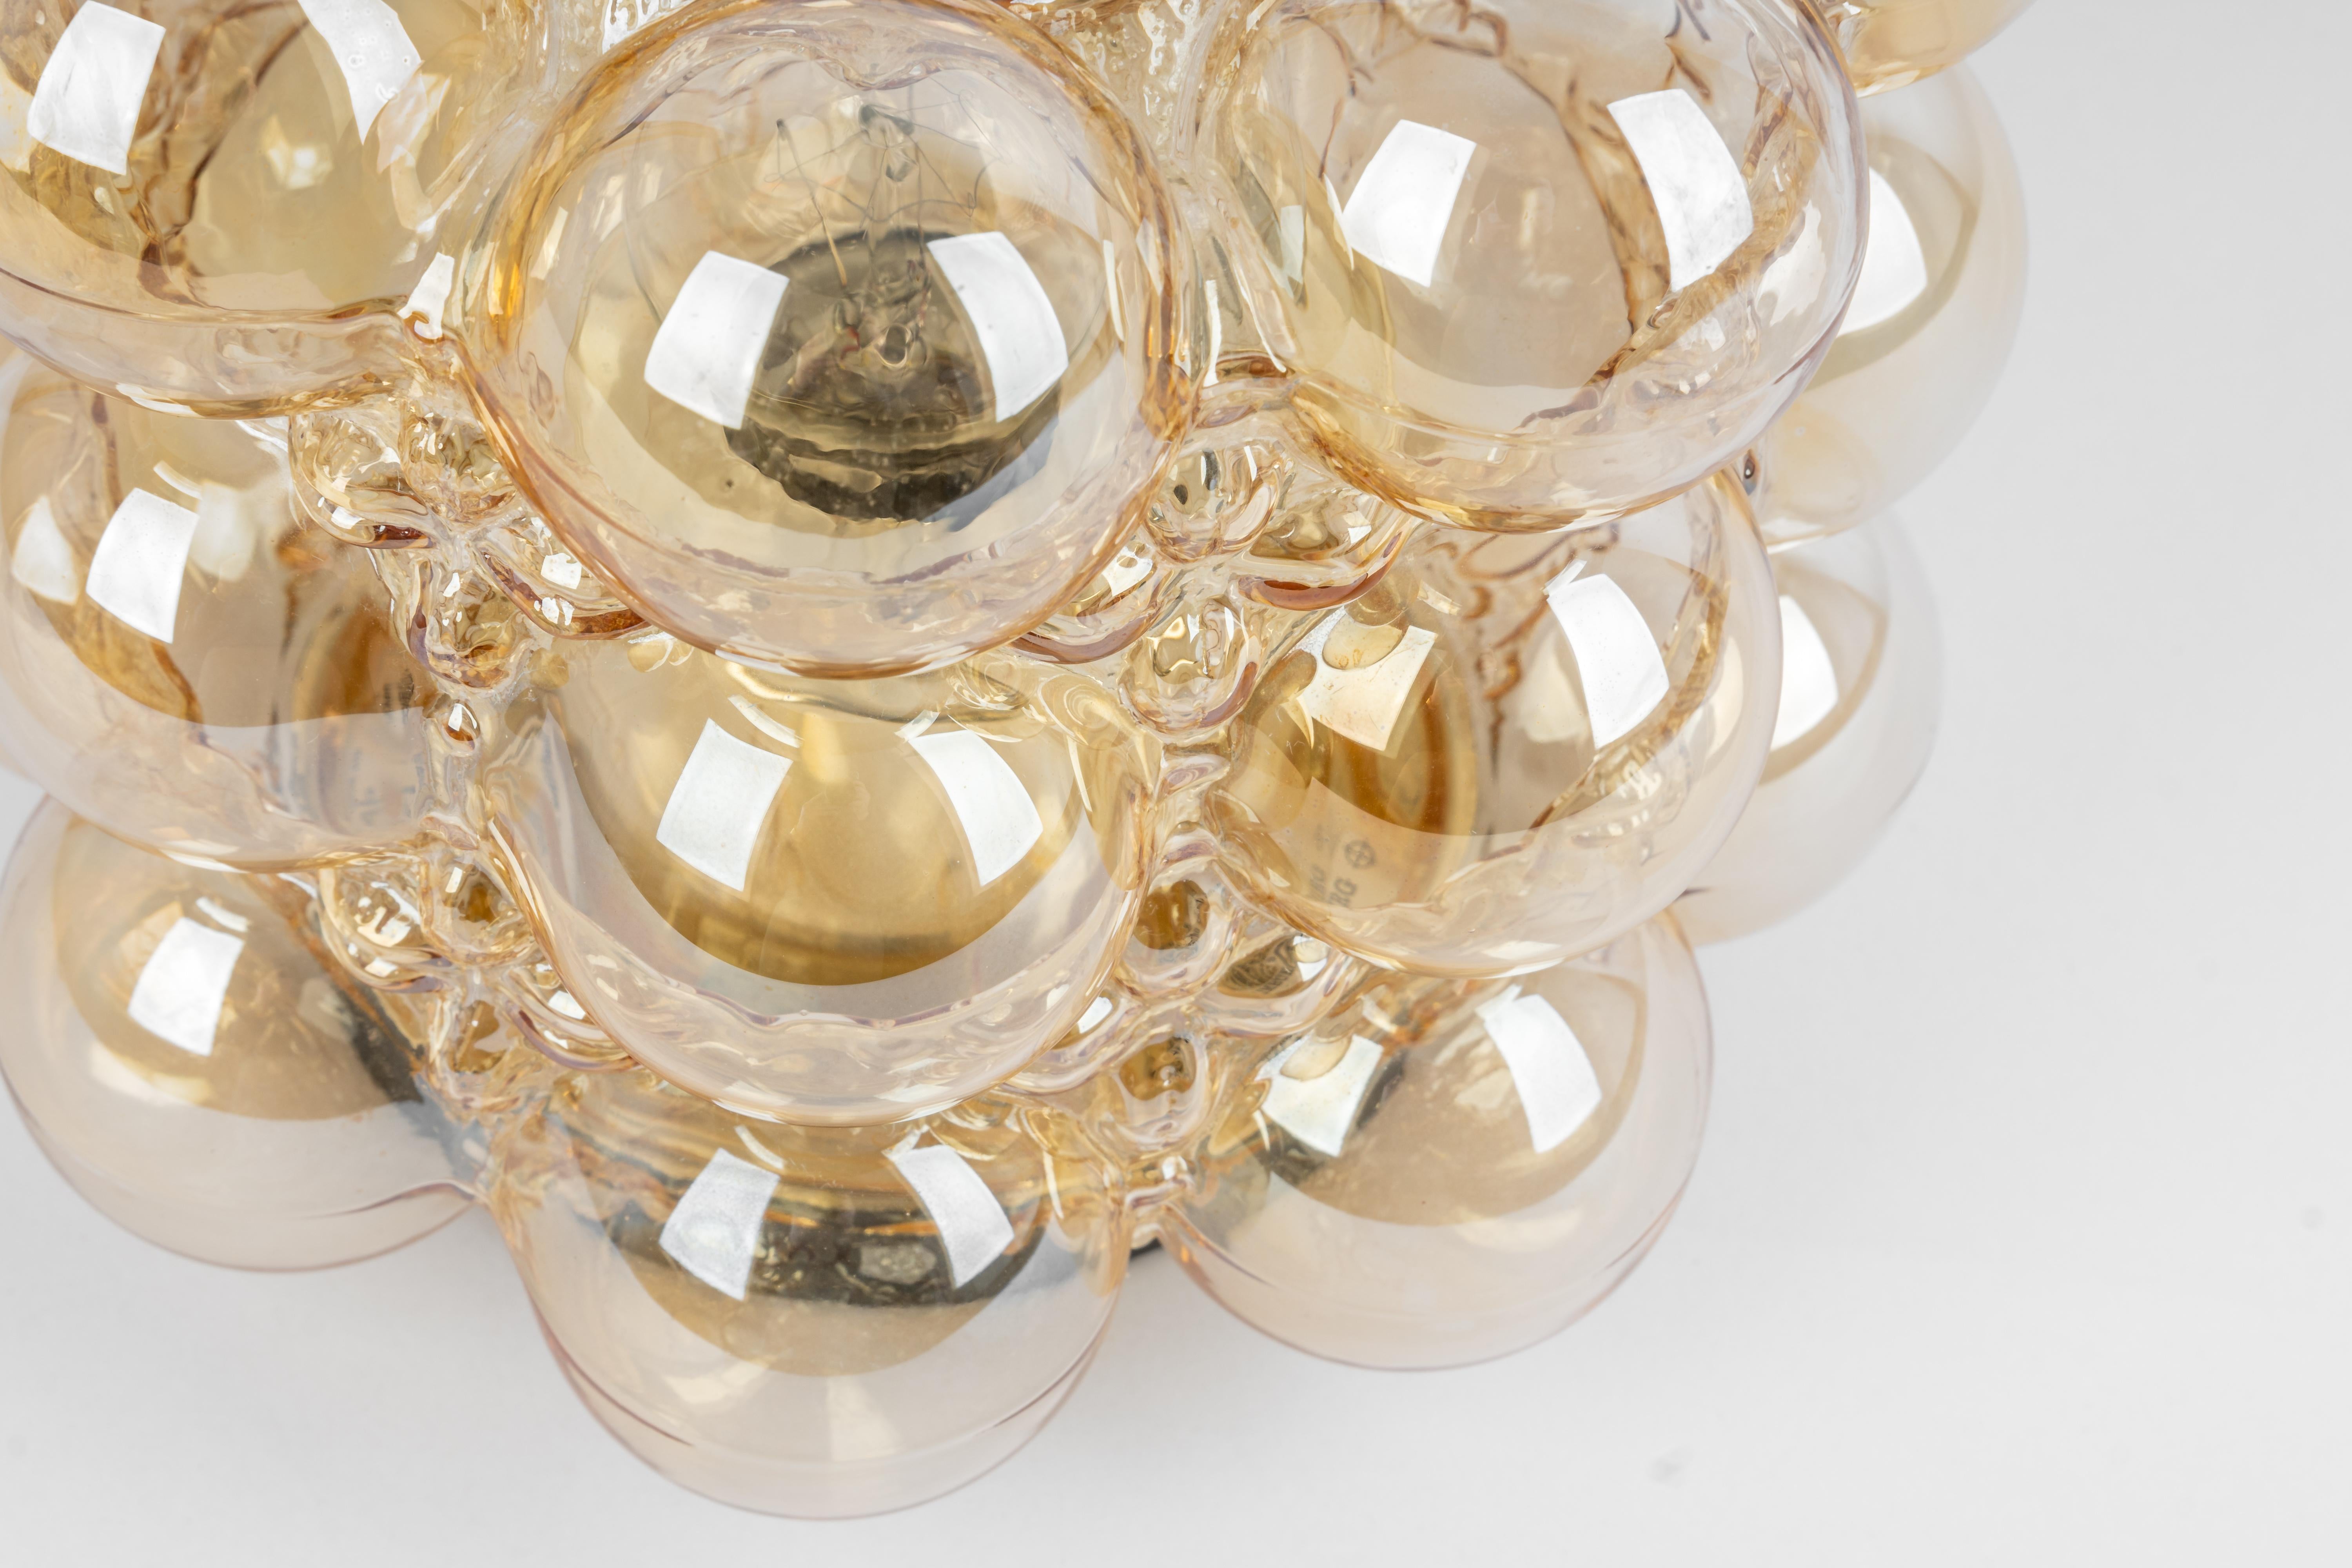 Amber bubble glass sconce by Helena Tynell, Limburg, Germany.
High quality and in very good condition. Cleaned, well-wired, and ready to use. 

Each Sconce requires 1 x E27 Standard bulbs with 60W max each 
Light bulbs are not included. It is